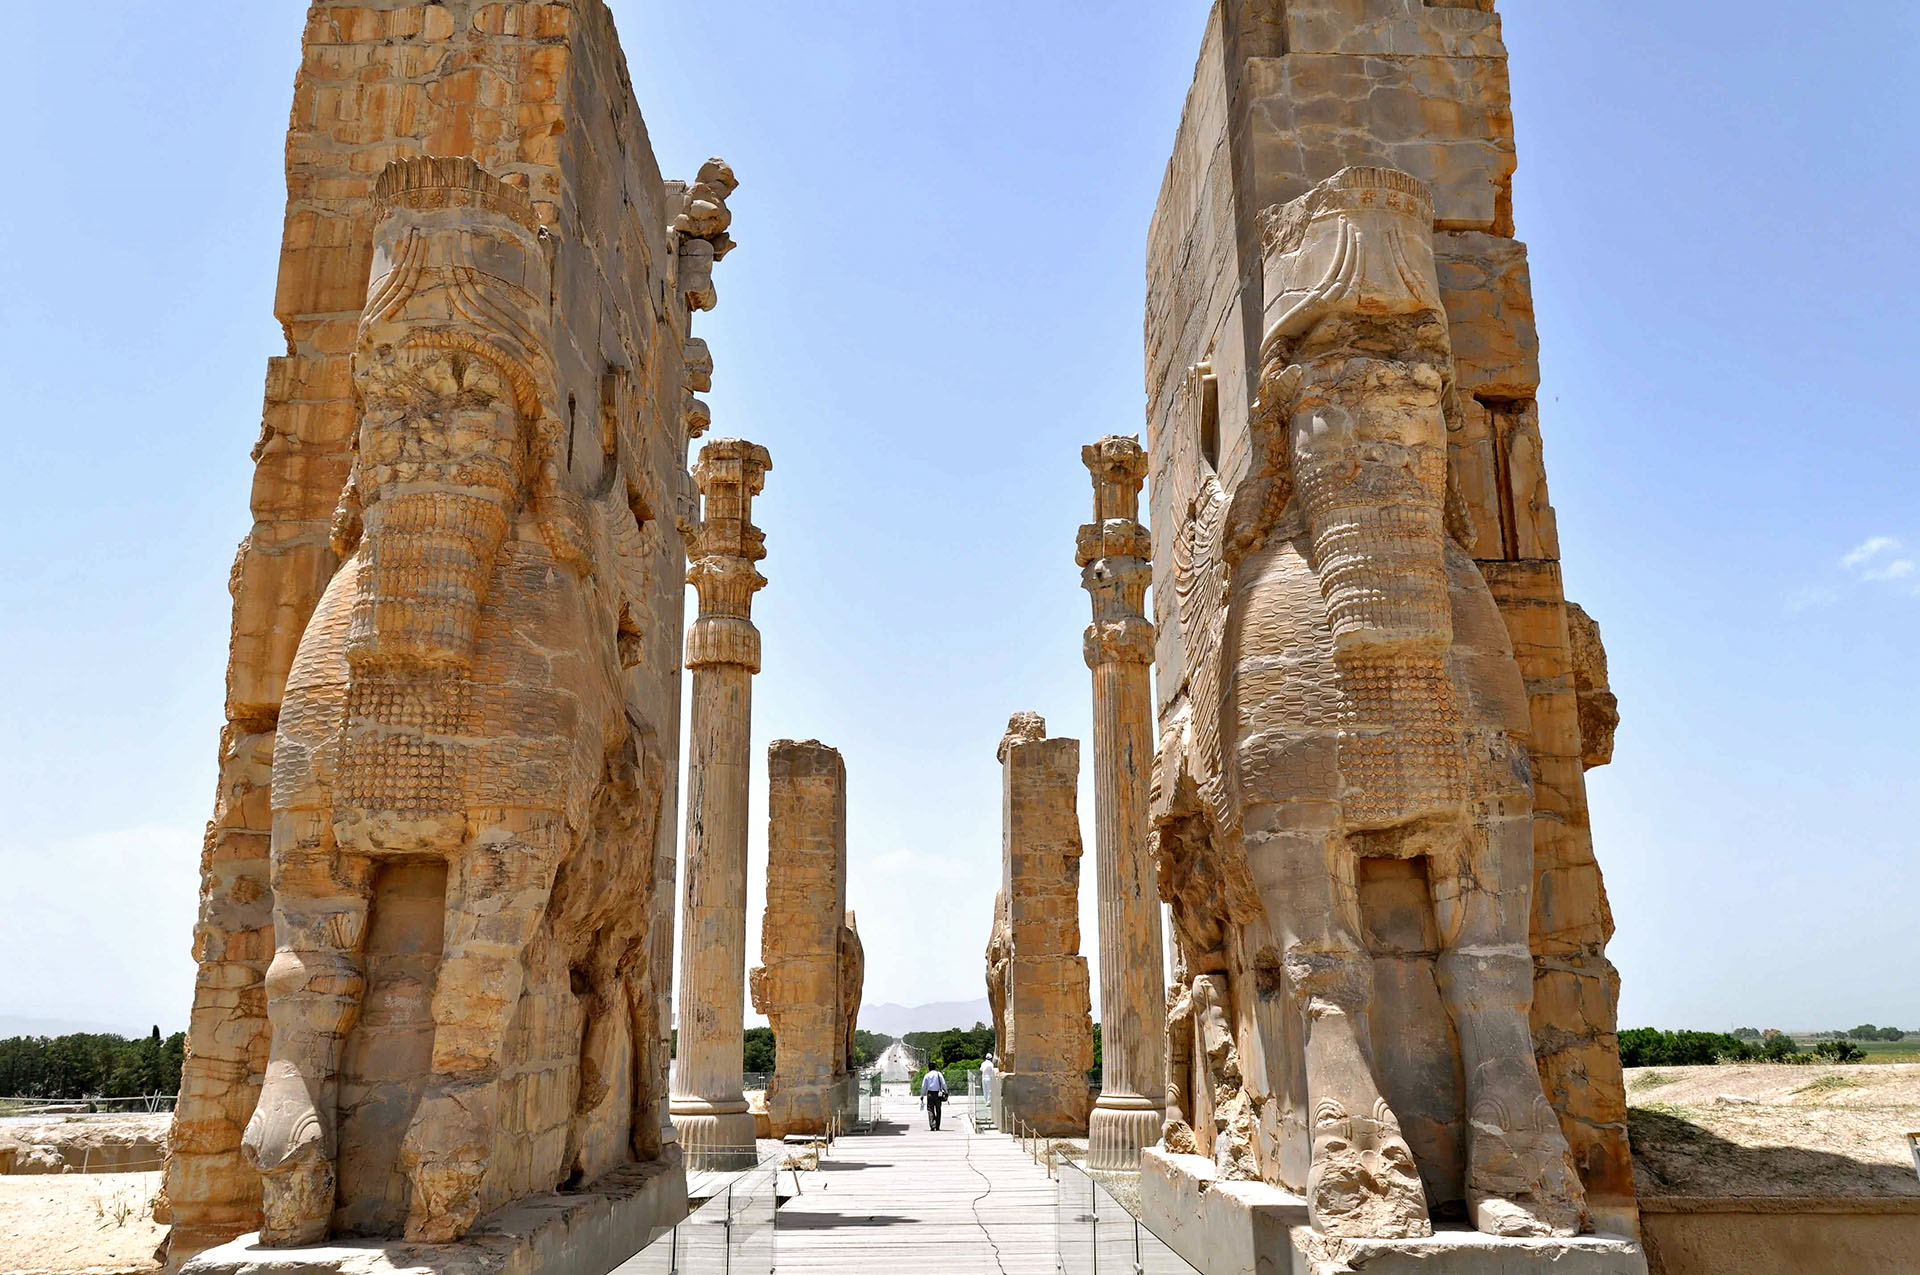 Columns of Persepolis structures